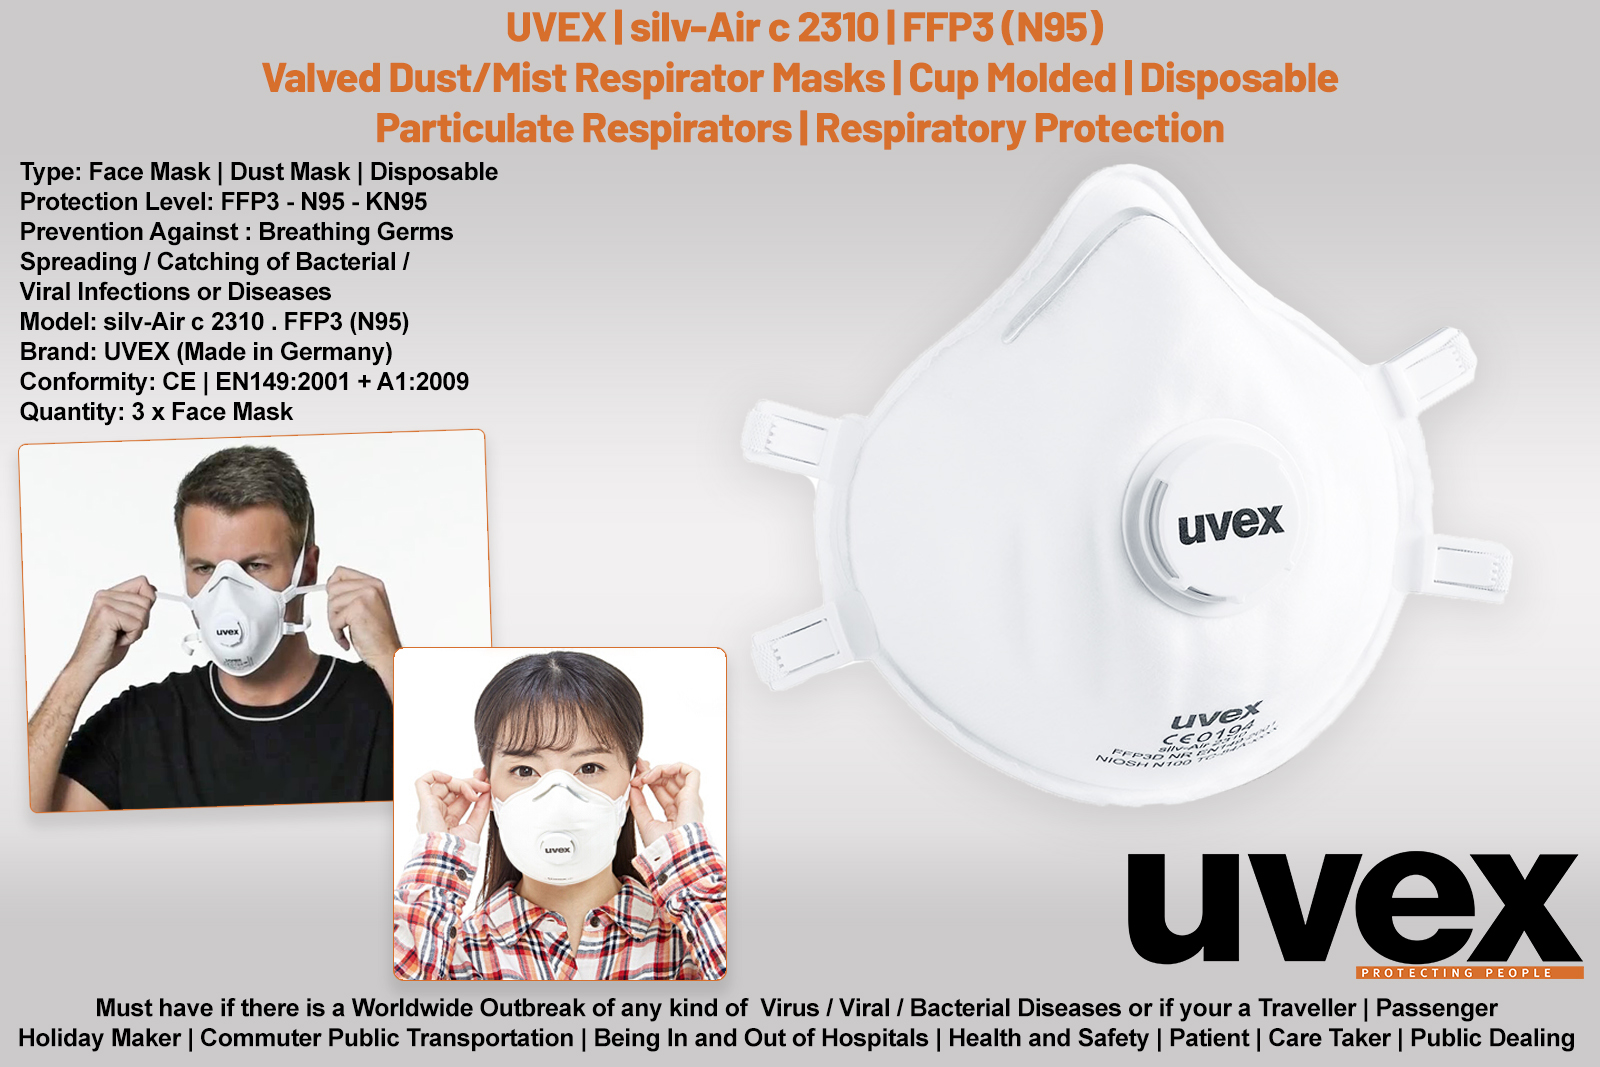 CORONA VIRUS COVID-19 Outbreak | Uvex Mask silv-Air c 2310 N95 FFP3 | GERMS Filter Dust Face Mask | Particulate Respirator | Qty 3 pc